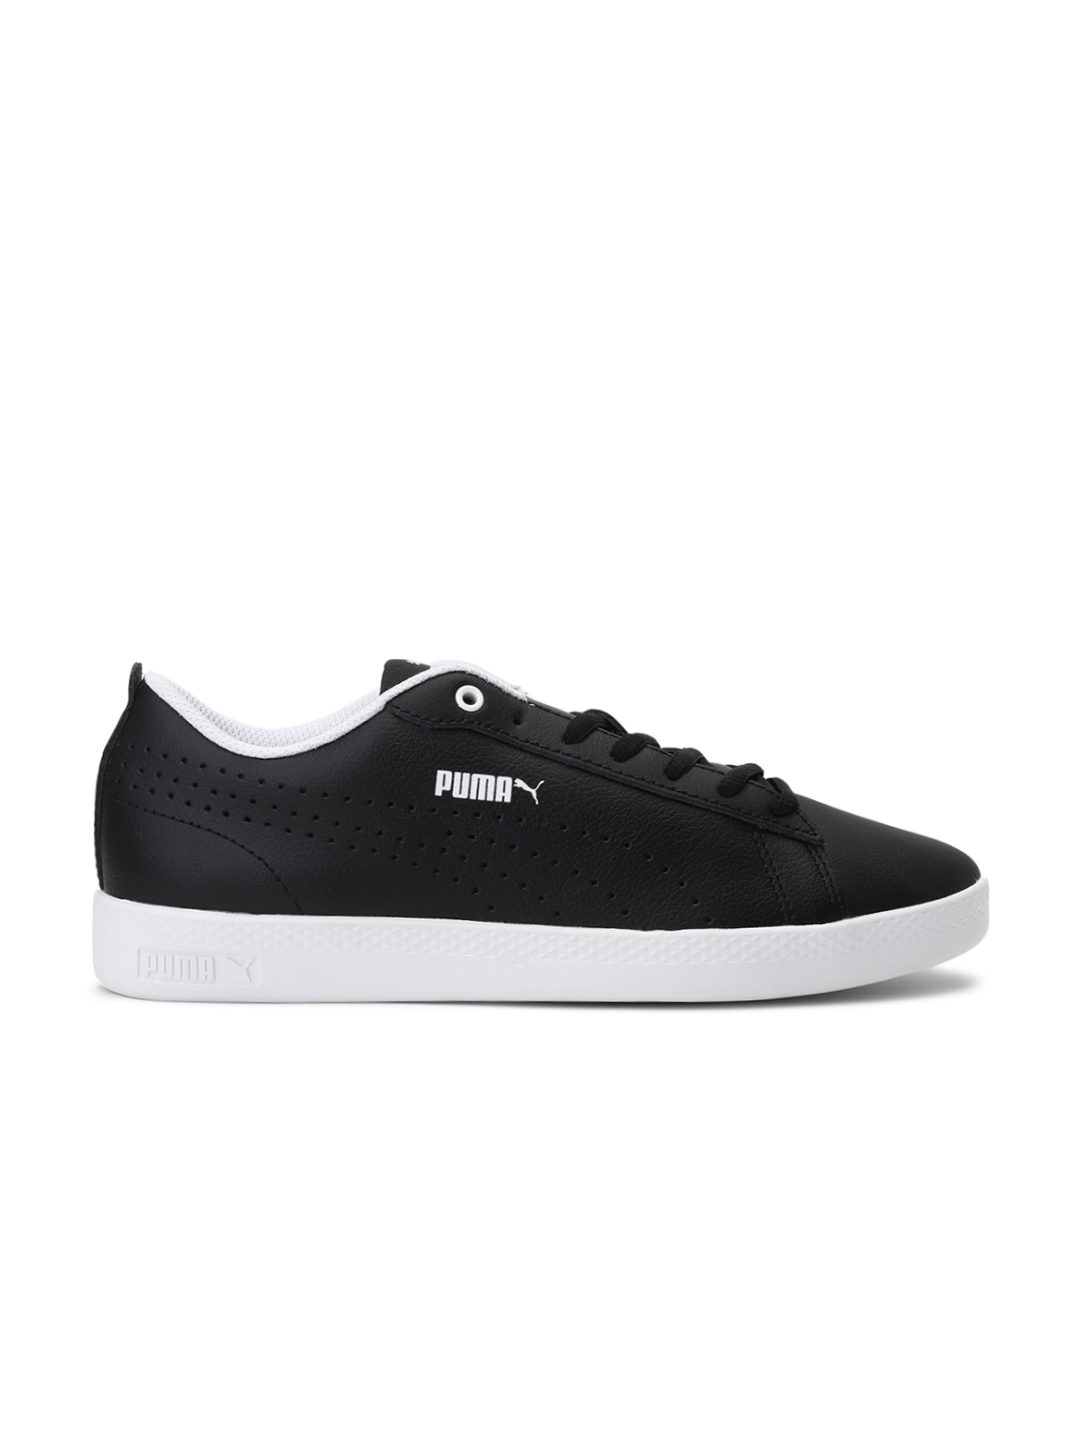 Puma | Smash Perf Leather Women's Sneakers 2